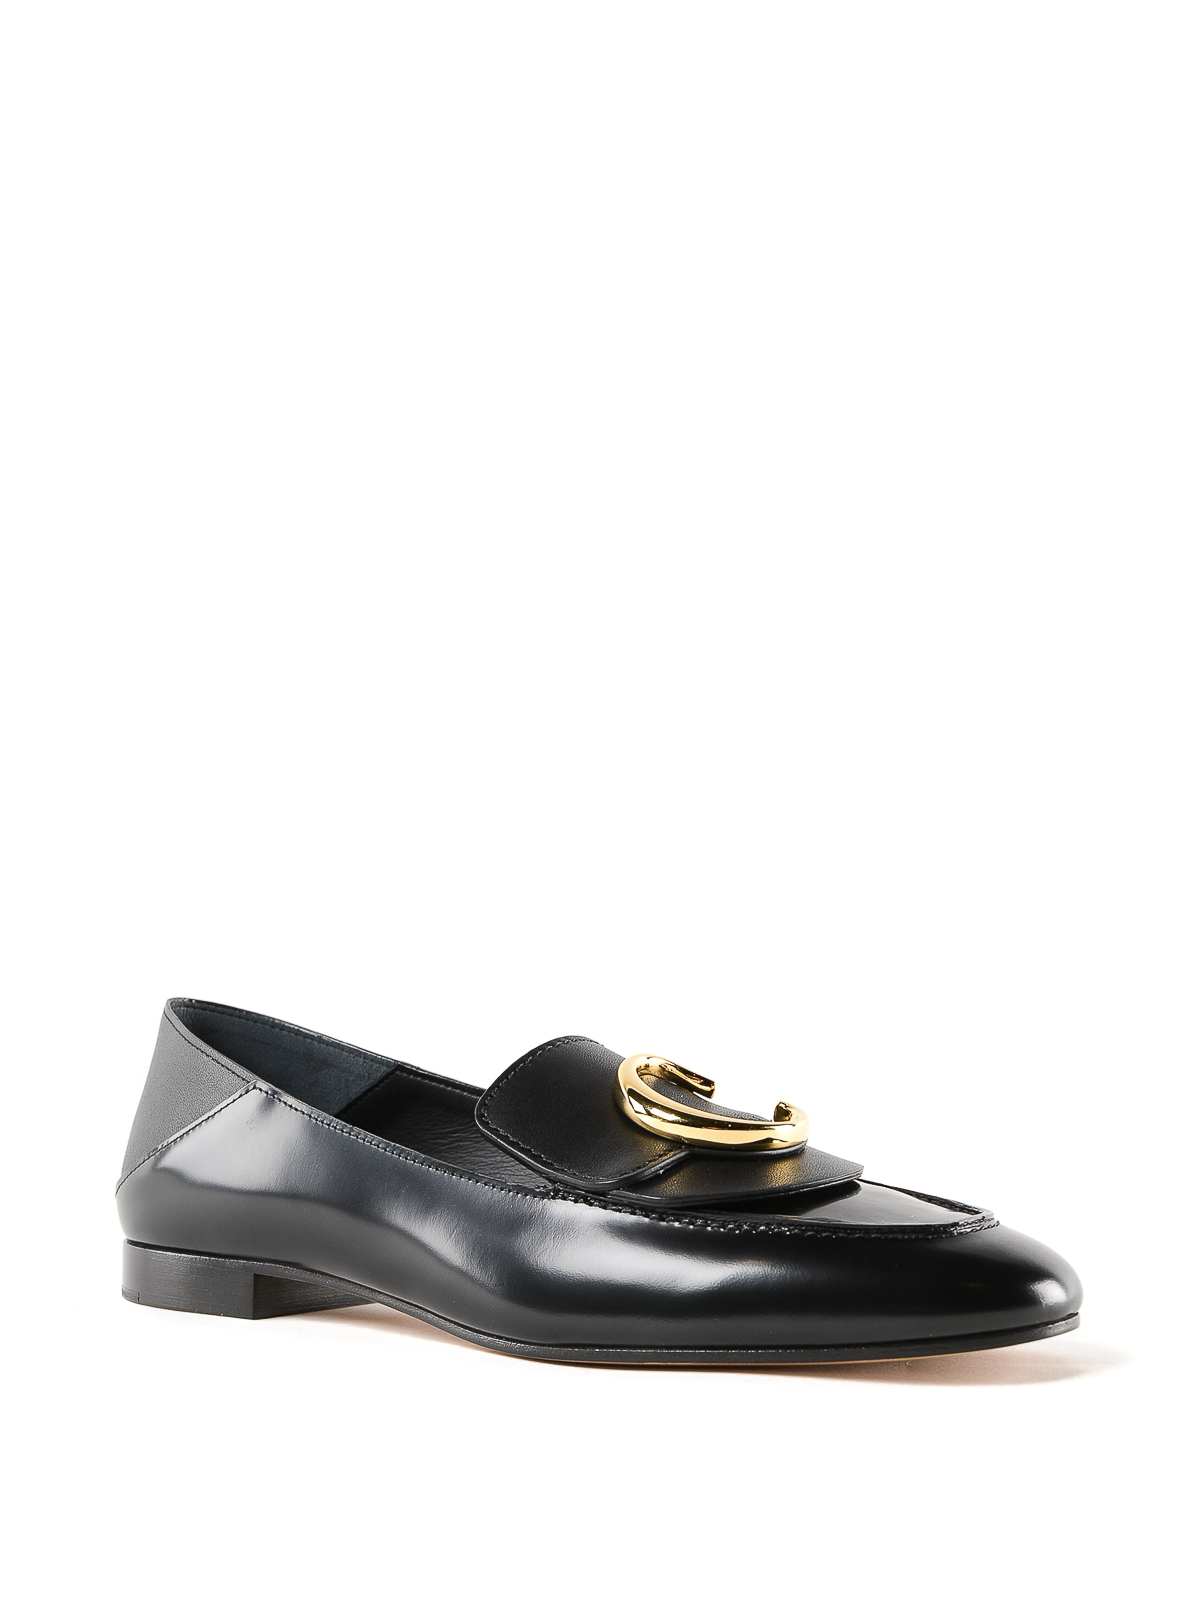 Loafers & Slippers Chloe' - Chloé black leather loafers - CHC19S13306001